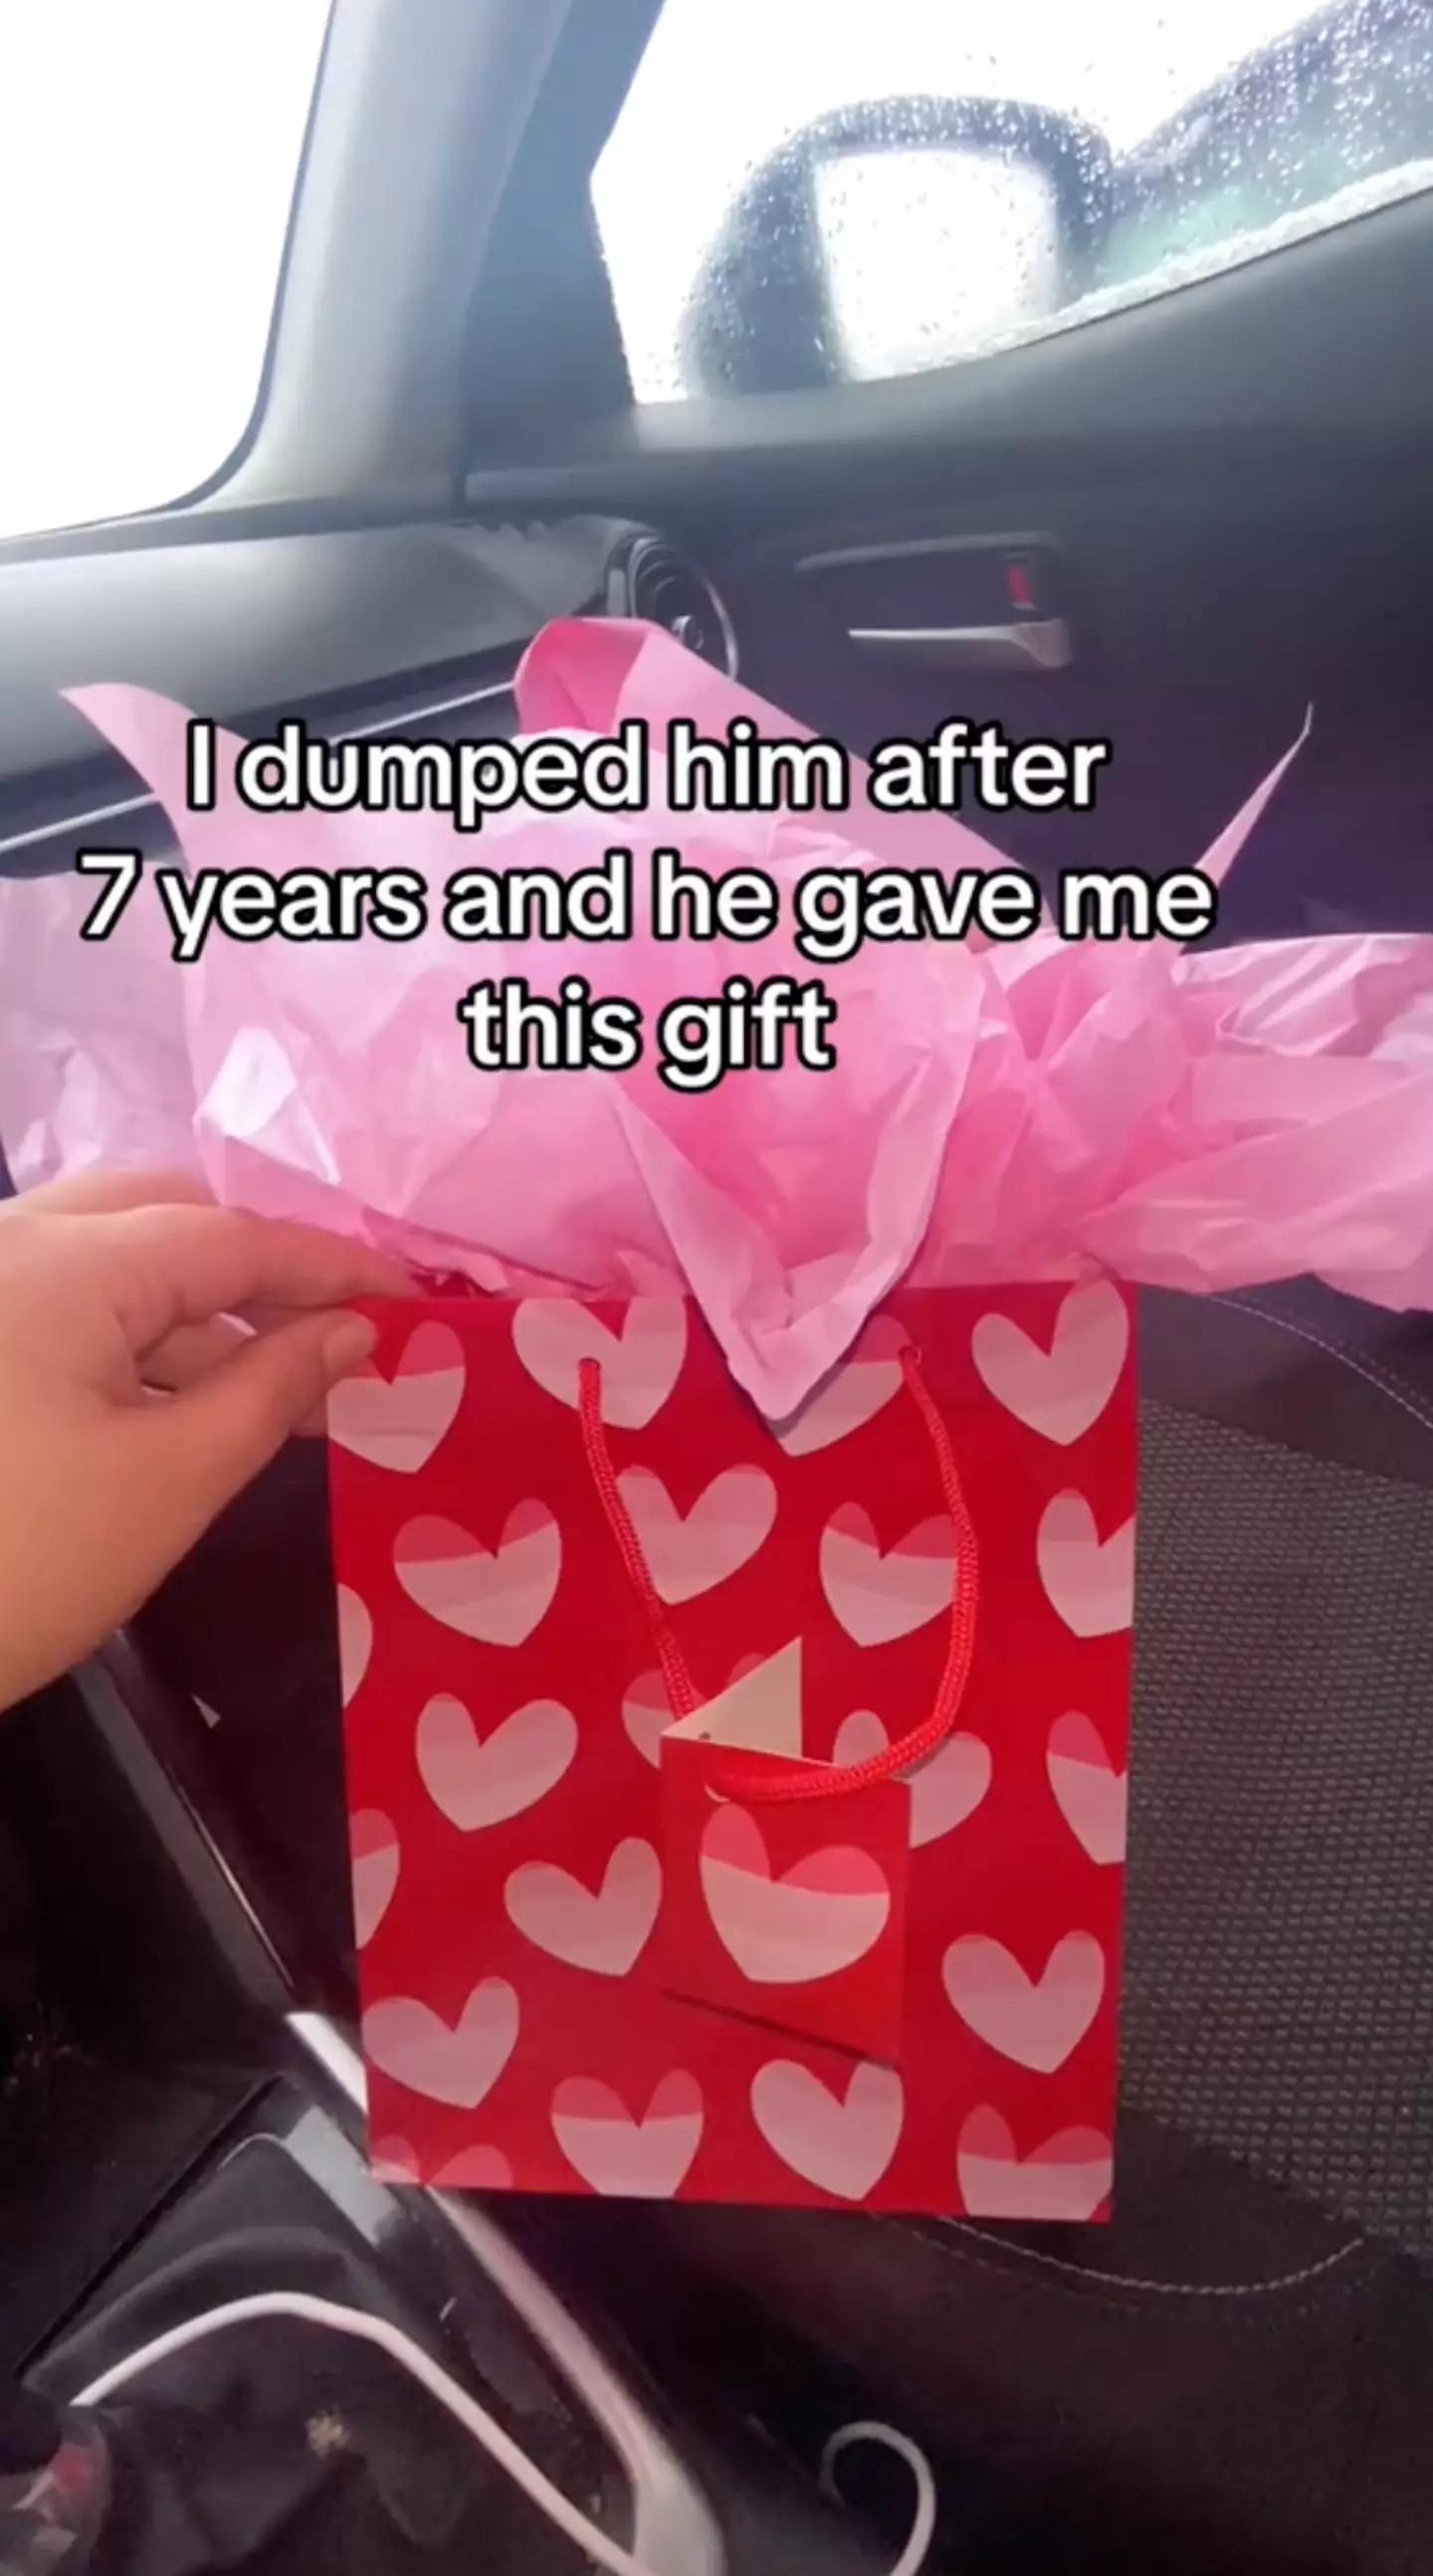 The woman shared the gift she received off ex-boyfriend after dumping him.